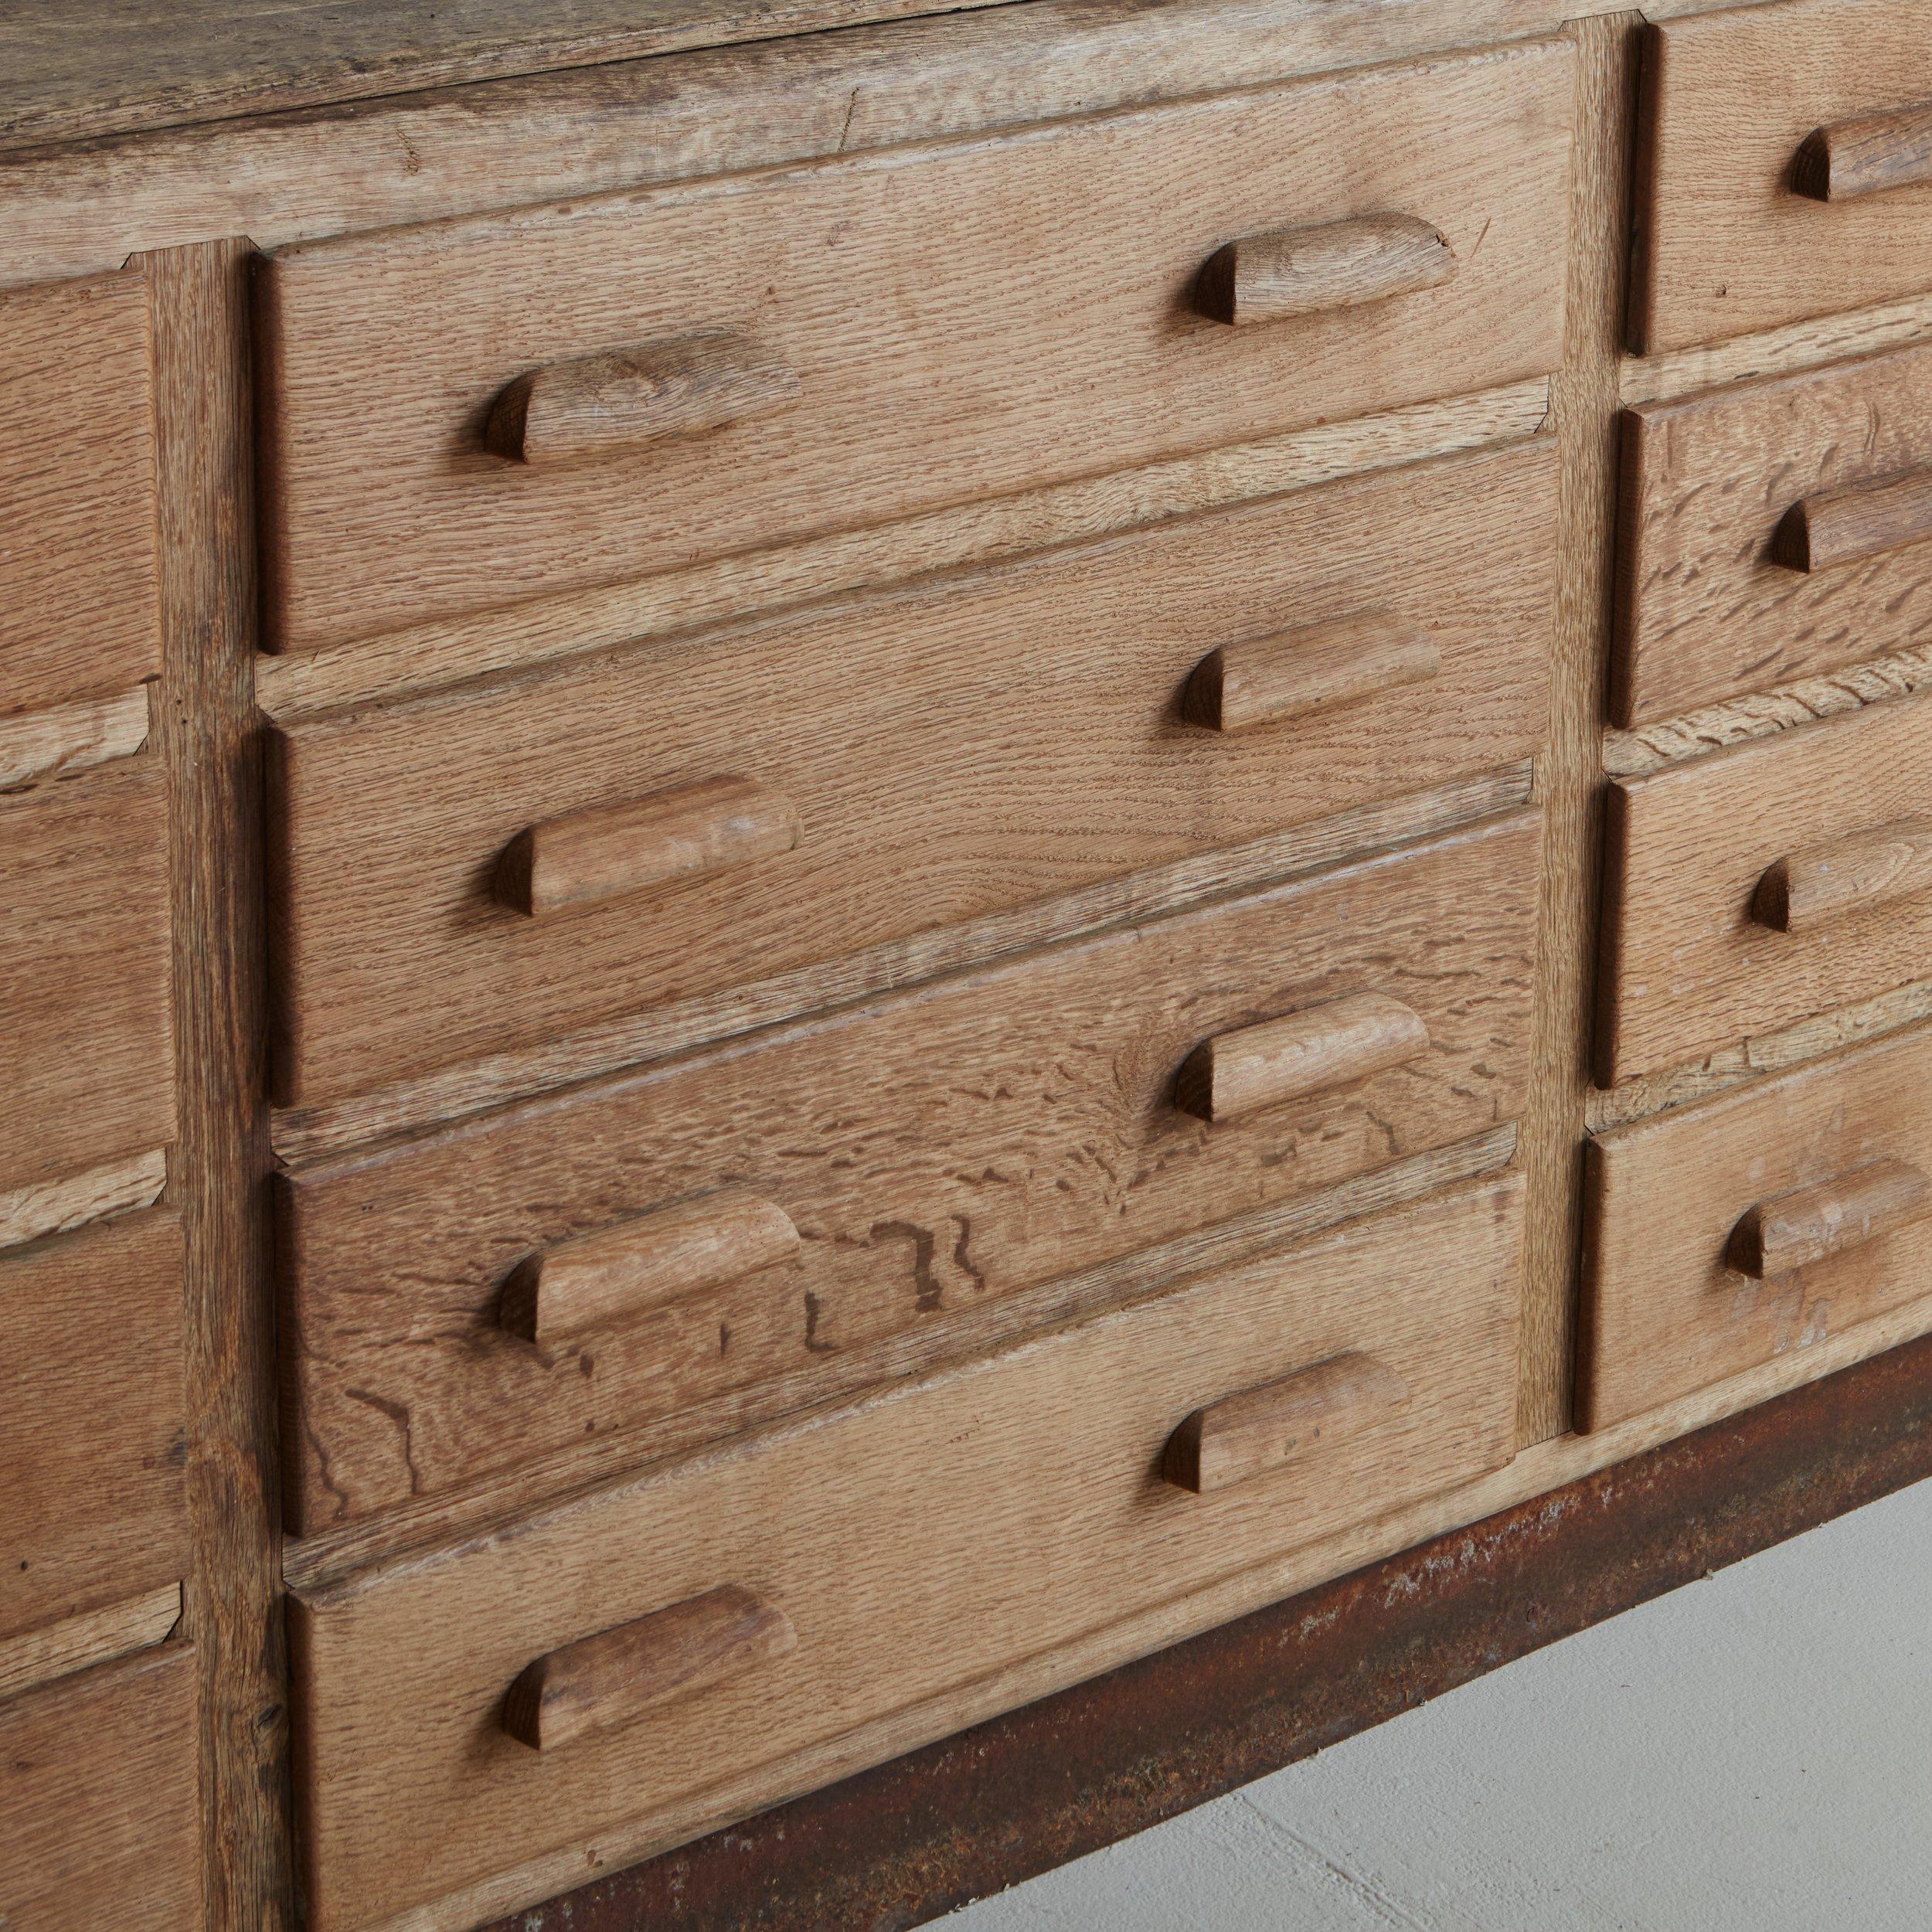 Mid-20th Century Monumental Oak Cabinet or Counter with 16 Drawers, Belgium 1940s For Sale